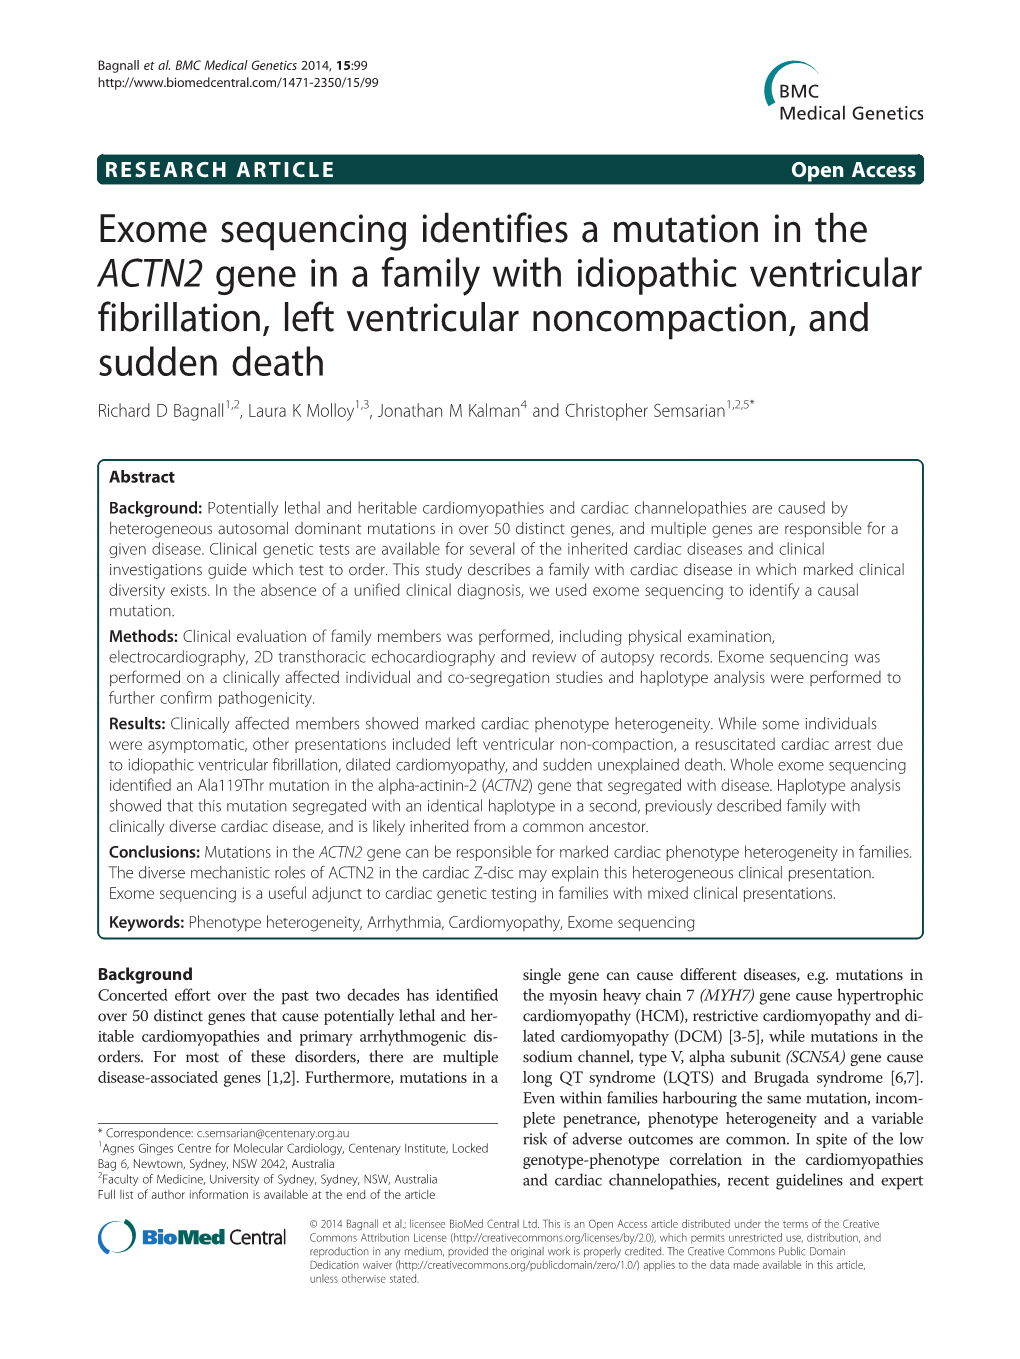 Exome Sequencing Identifies a Mutation in The